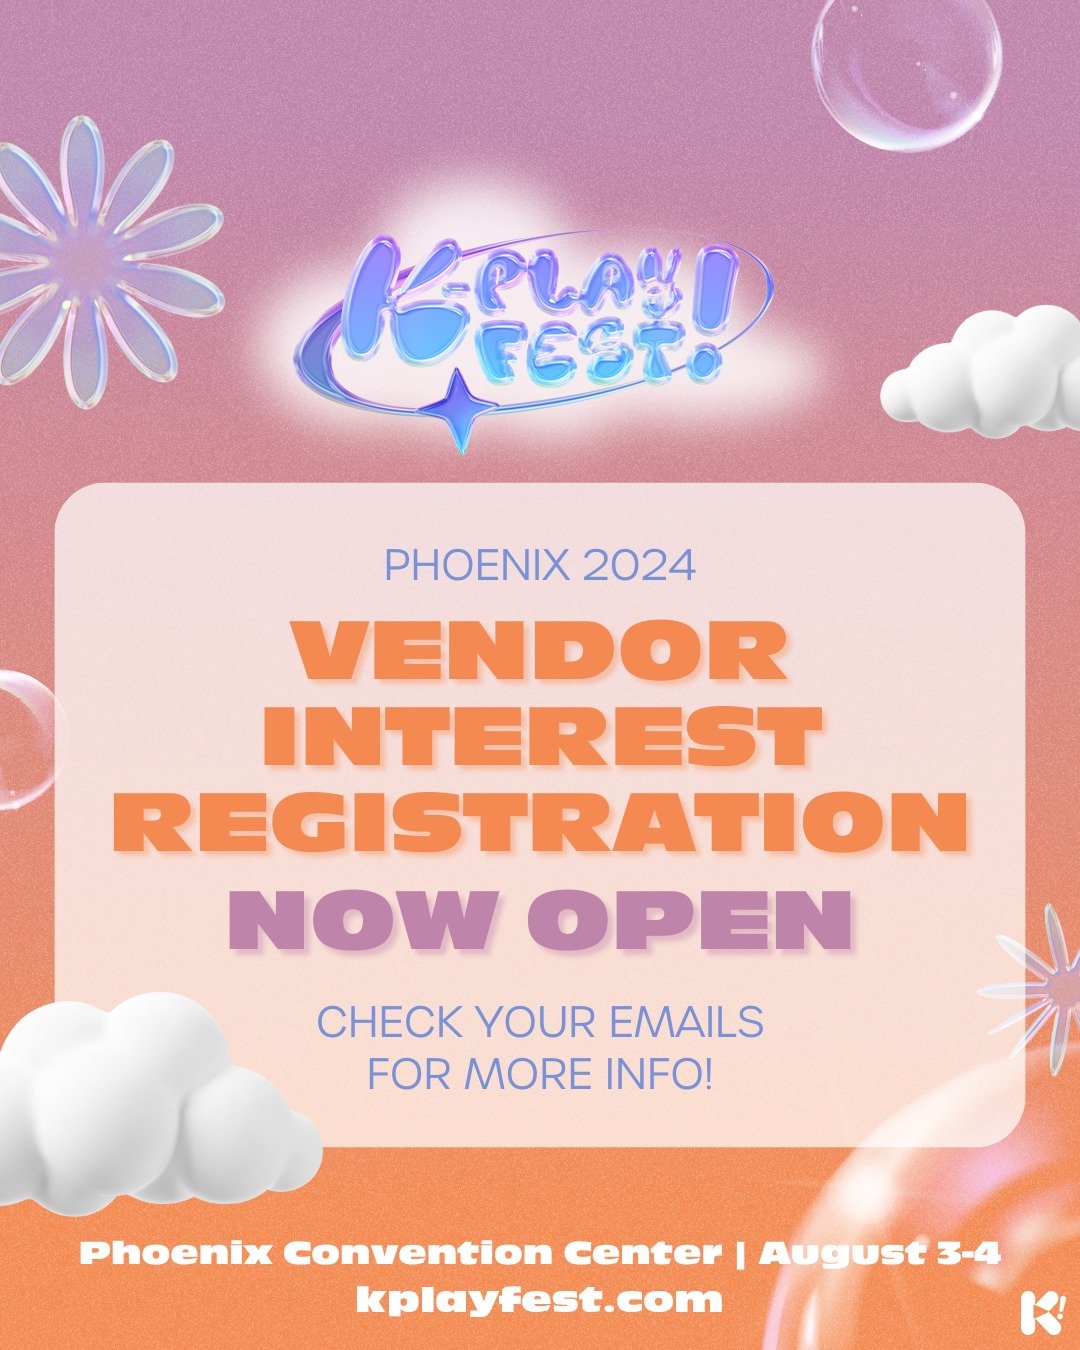 🌻 ATTENTION VENDORS 🌻 Did you previously fill out 🗒️ our vendor interest form? Now&rsquo;s the time to SECURE 🔐 your spot at #kplayfestphoenix2024 ❣️ We can&rsquo;t wait to see 👀 you all at K-PLAY! FEST PHX! 🏜️ 

⭐️ Visit kplayfest.com for more